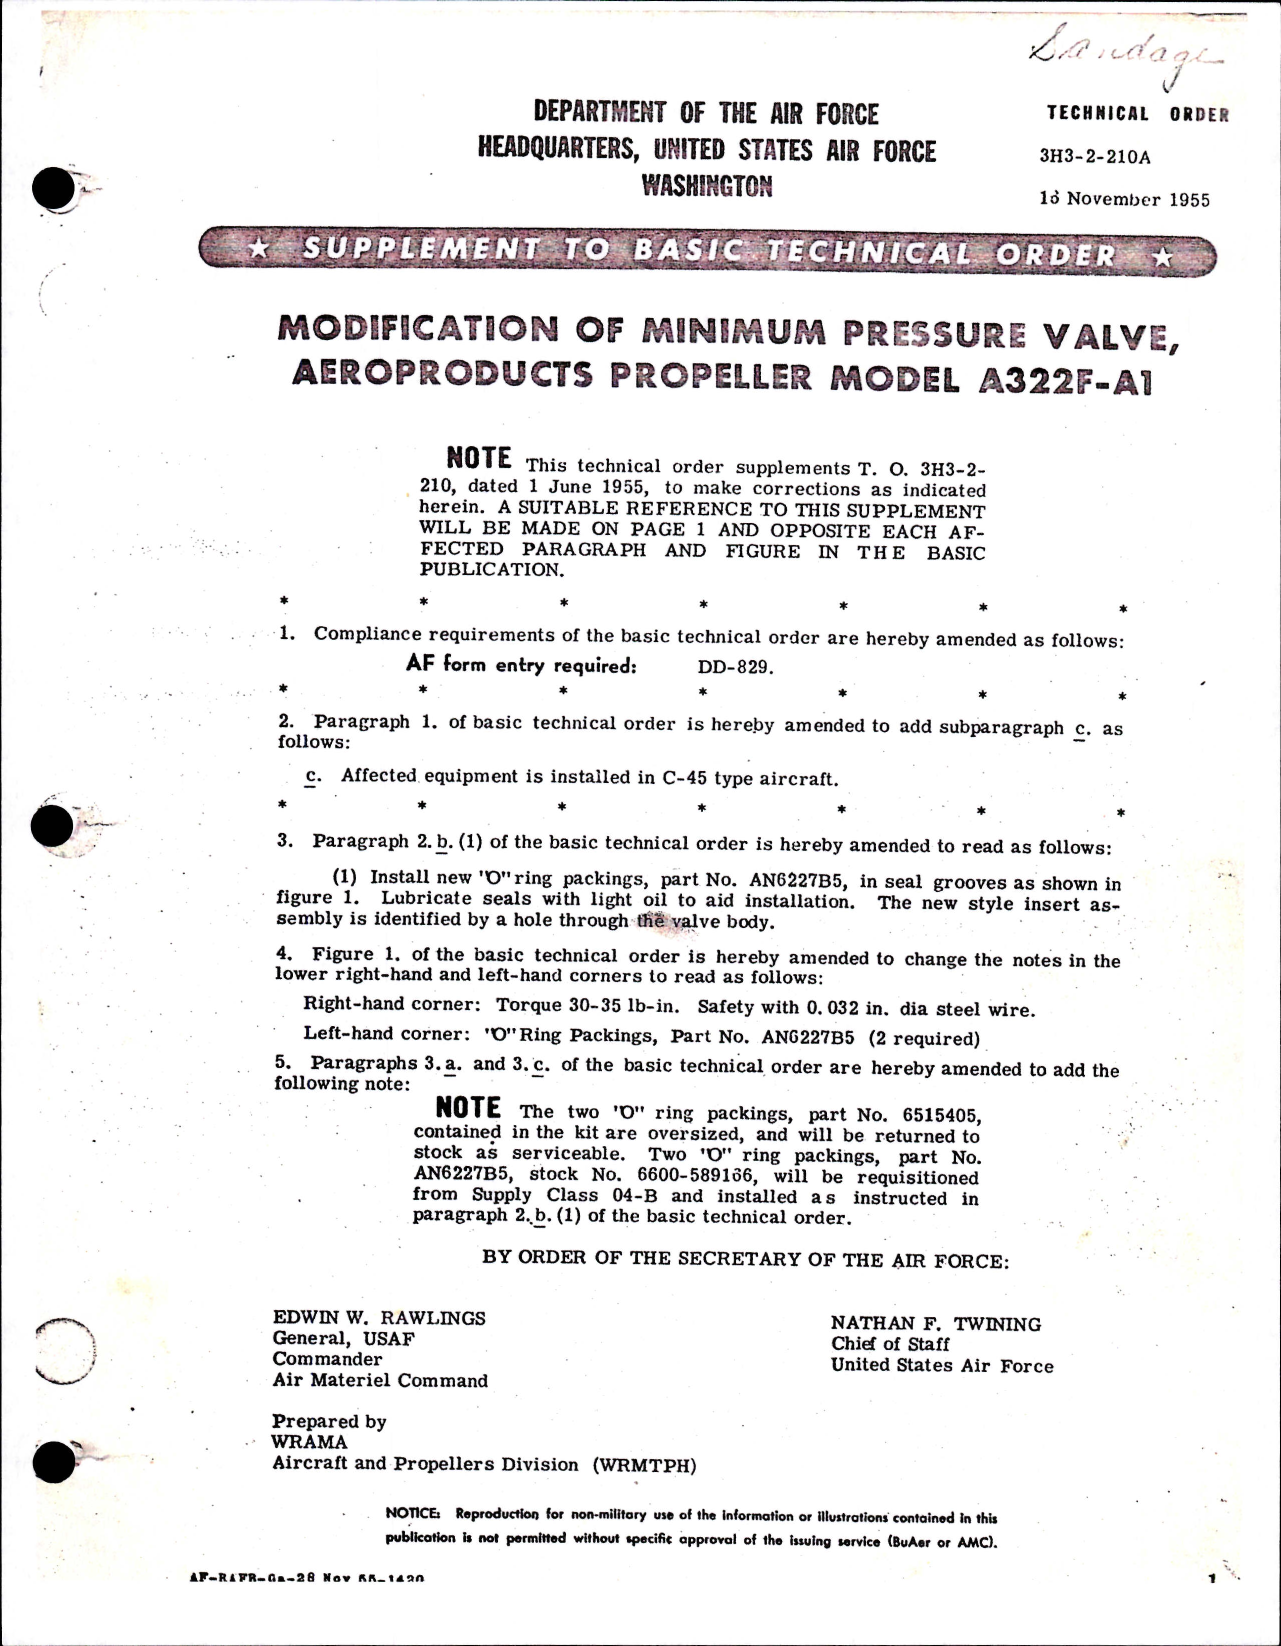 Sample page 1 from AirCorps Library document: Modification of Minimum Pressure Valve for Aeroproducts Propeller Model A422-E1 and A-422-E2